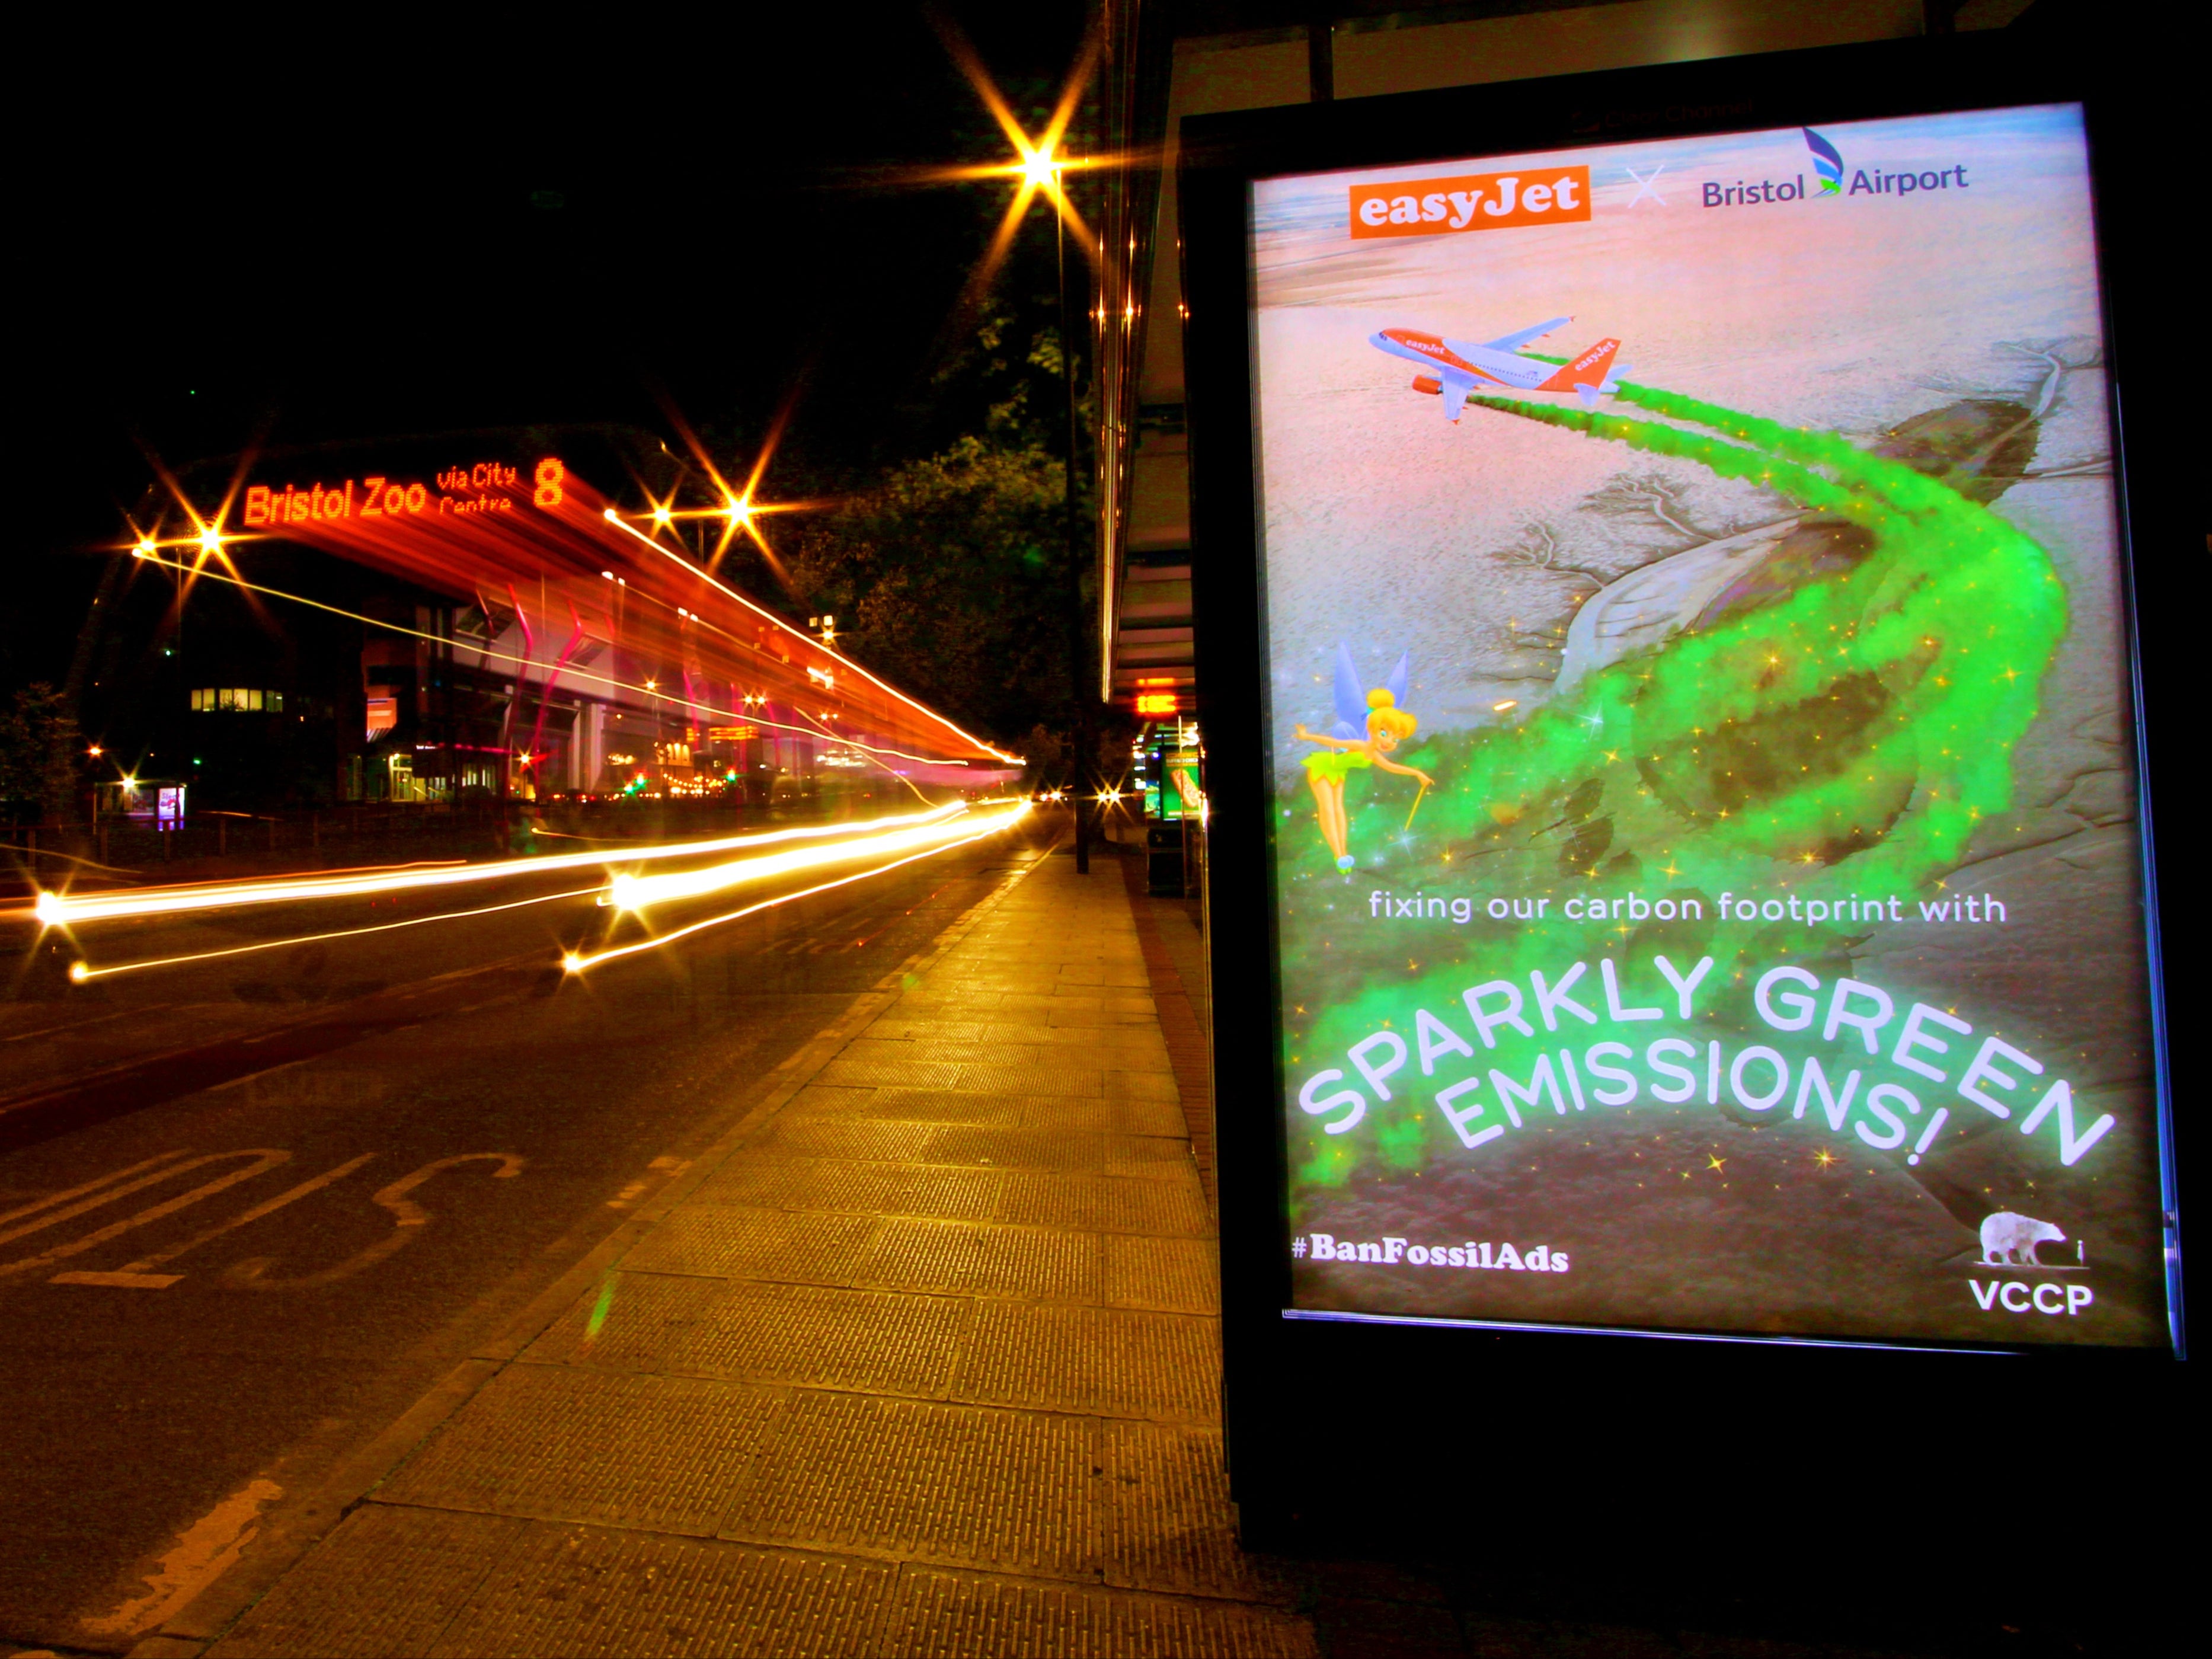 Bus stop advert spoofing EasyJet and Bristol Airport